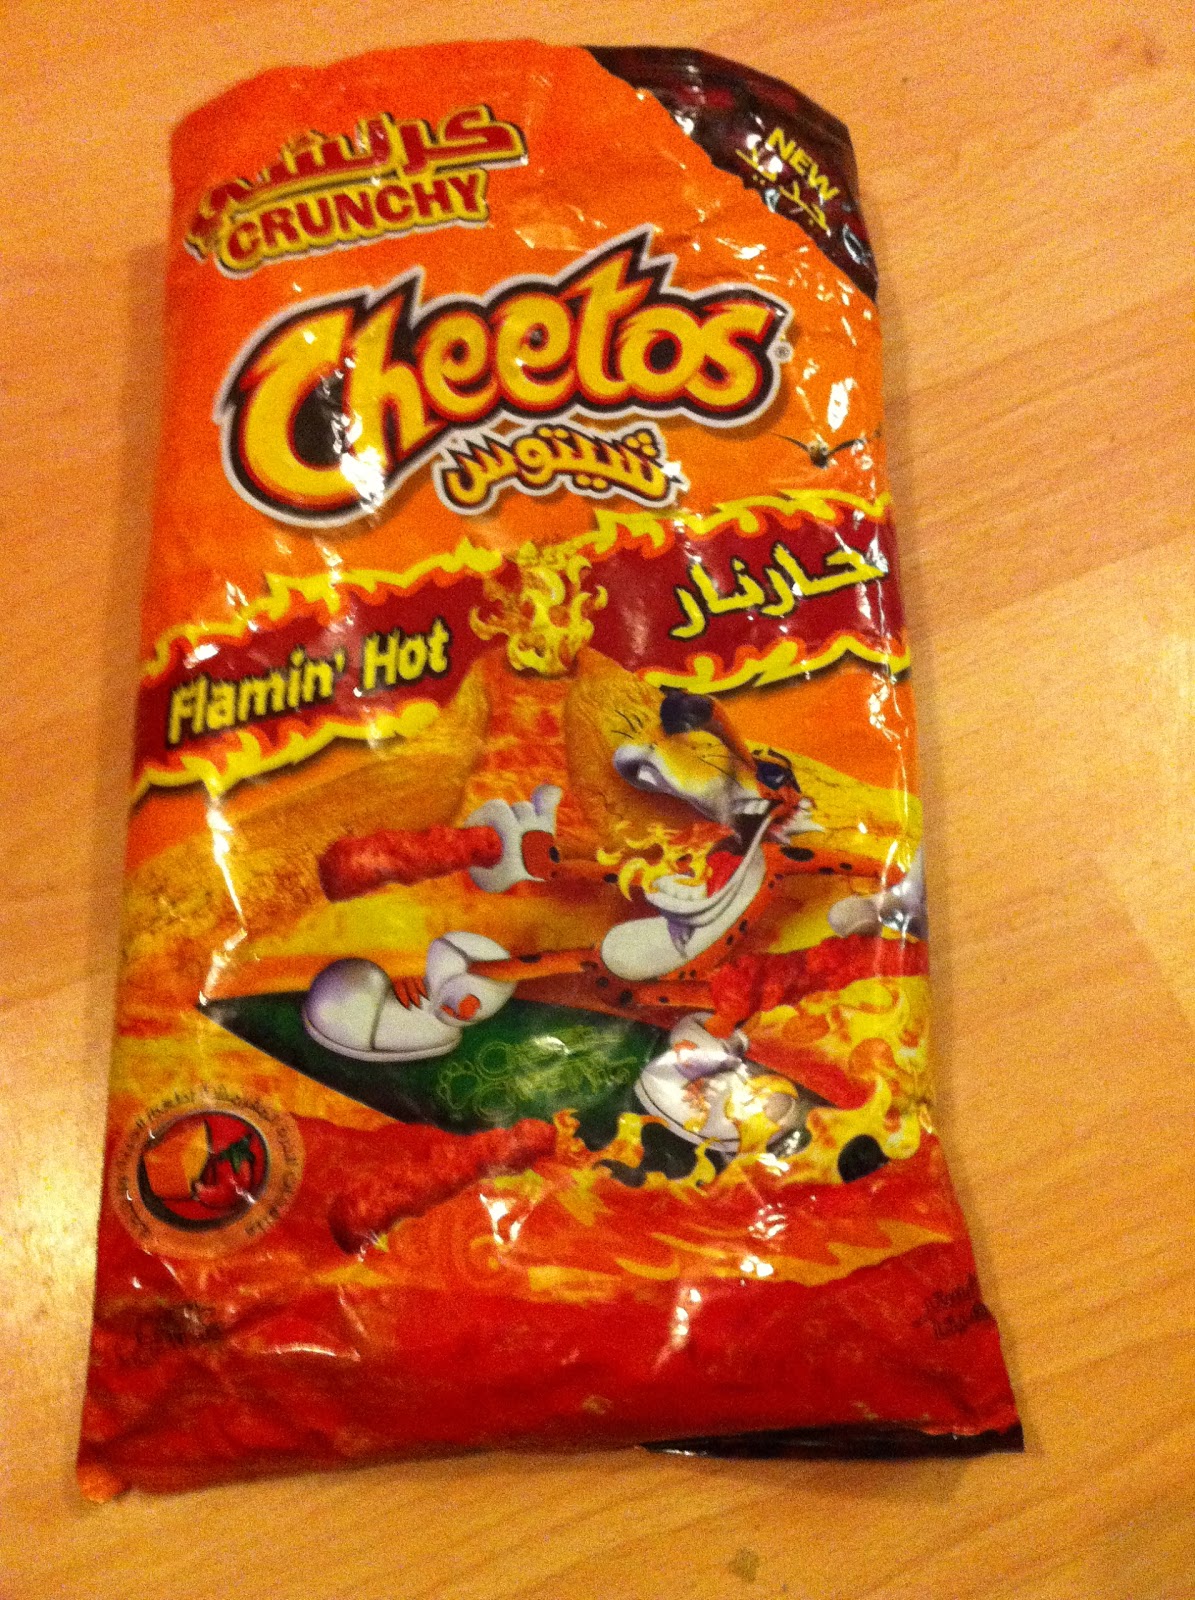 Today's Review: Flamin' Hot Cheetos.